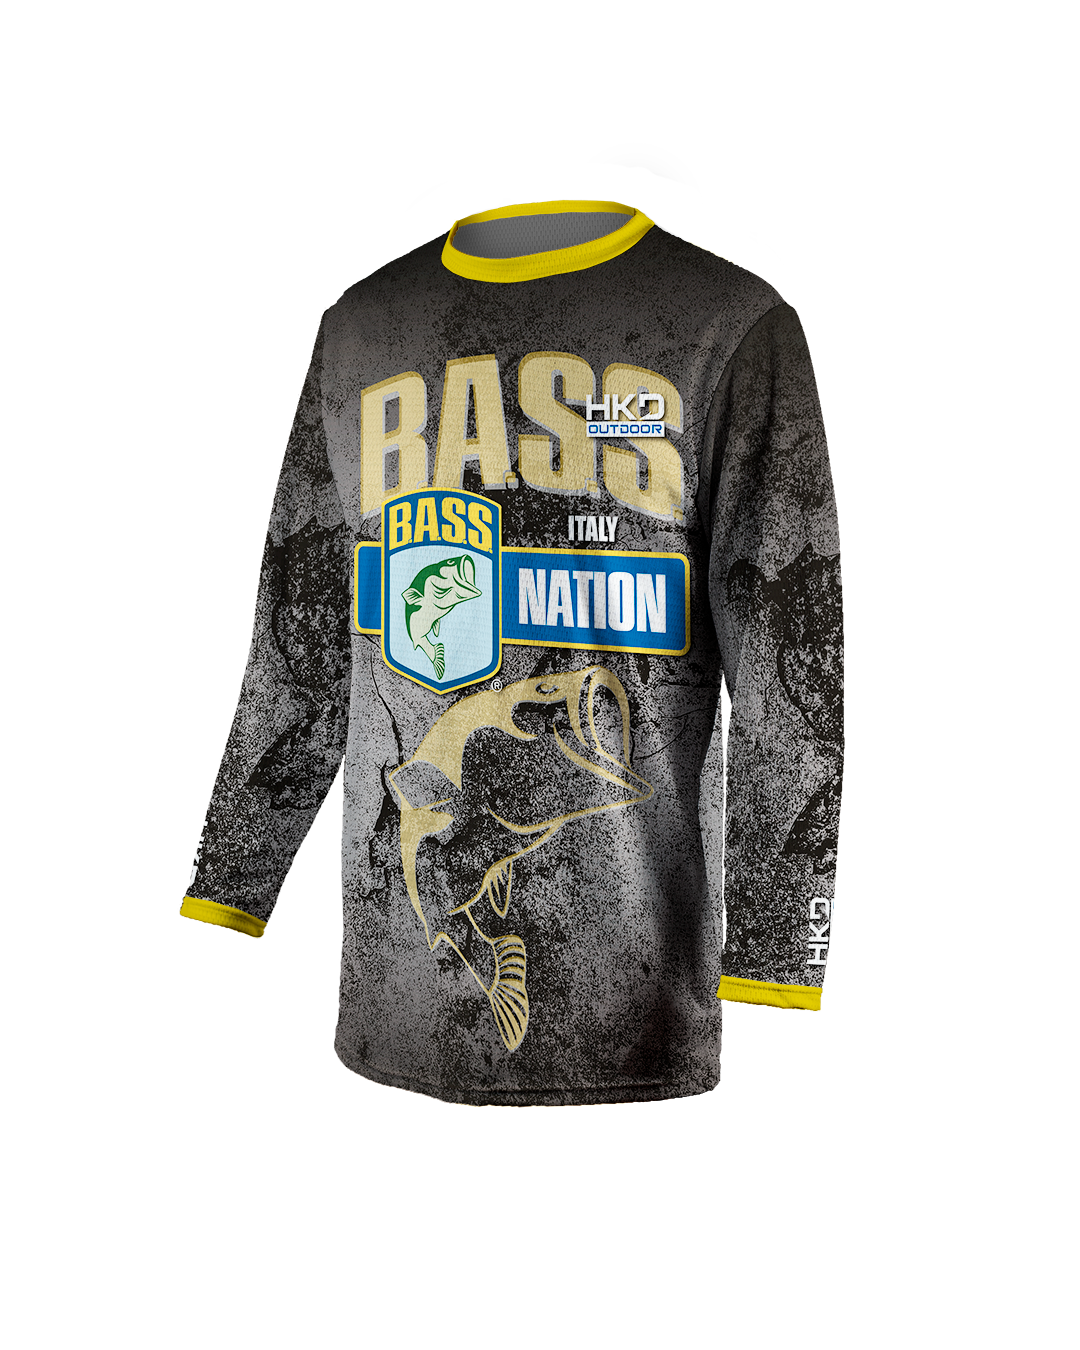 Carbon® Italy BASS Nation long sleeve jersey